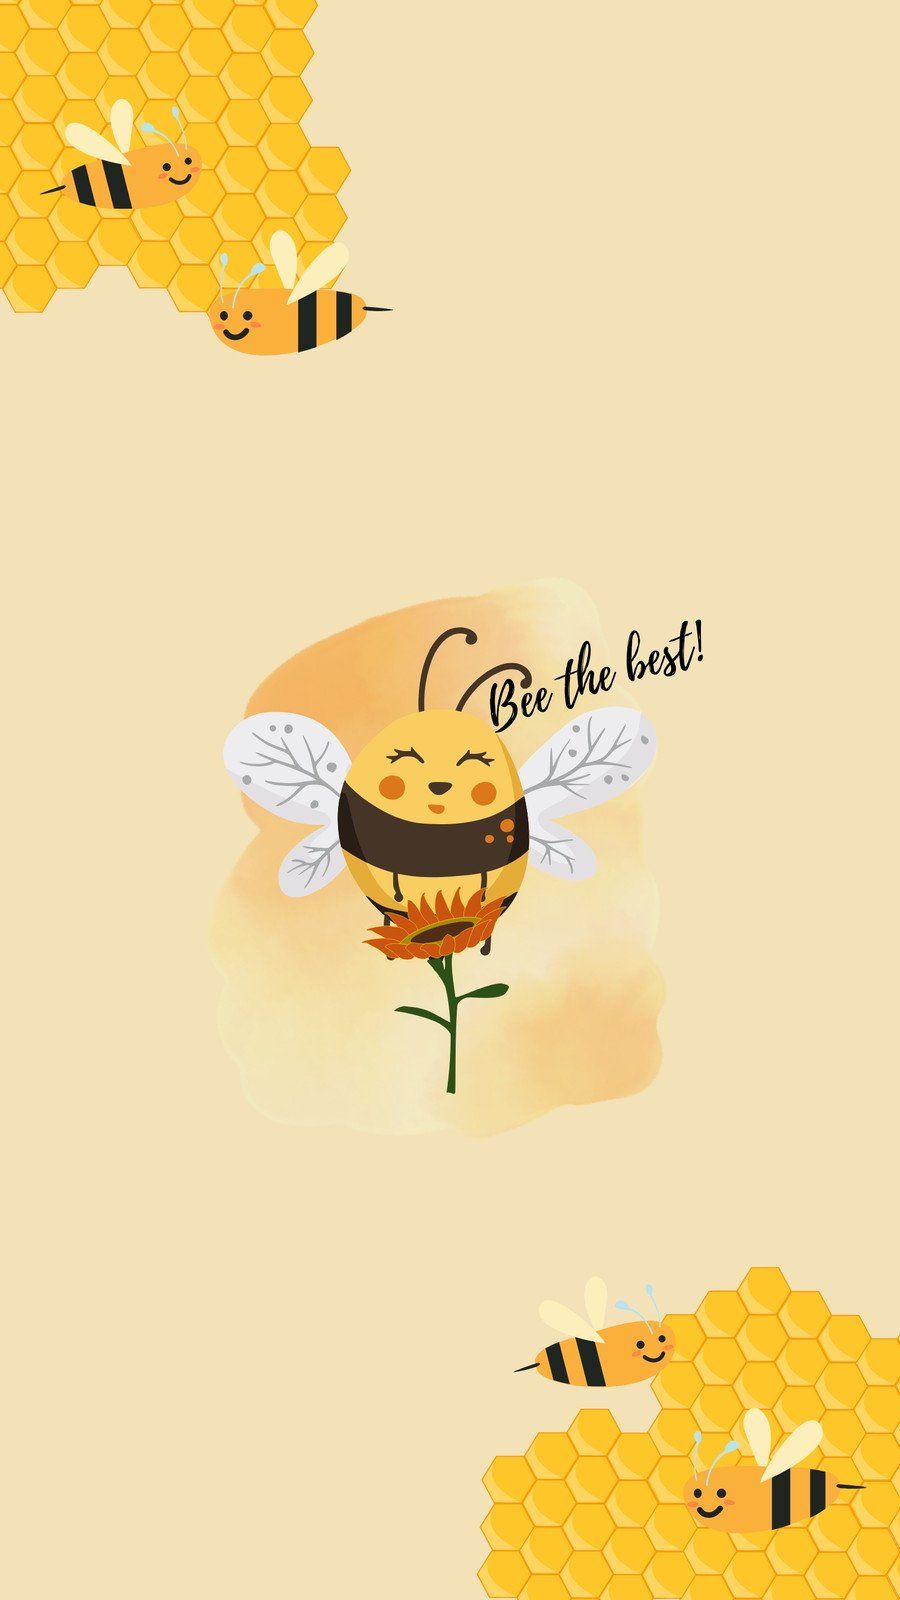 A wallpaper with a cute bee and honeycomb - Bee